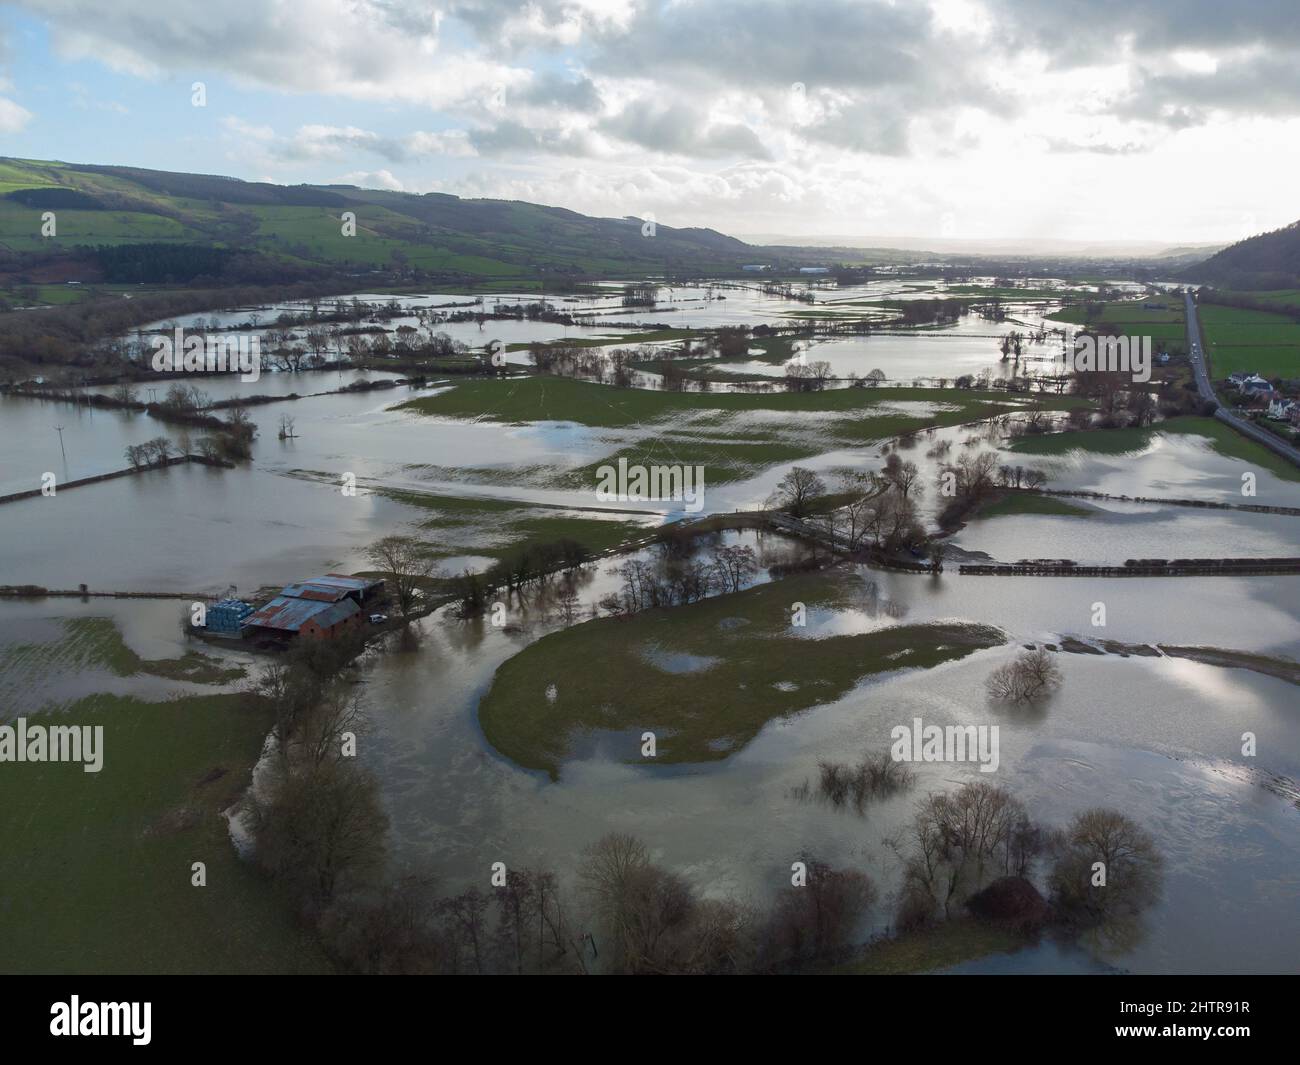 Flooded farmland by the River Severn on the England/Wales border Stock Photo